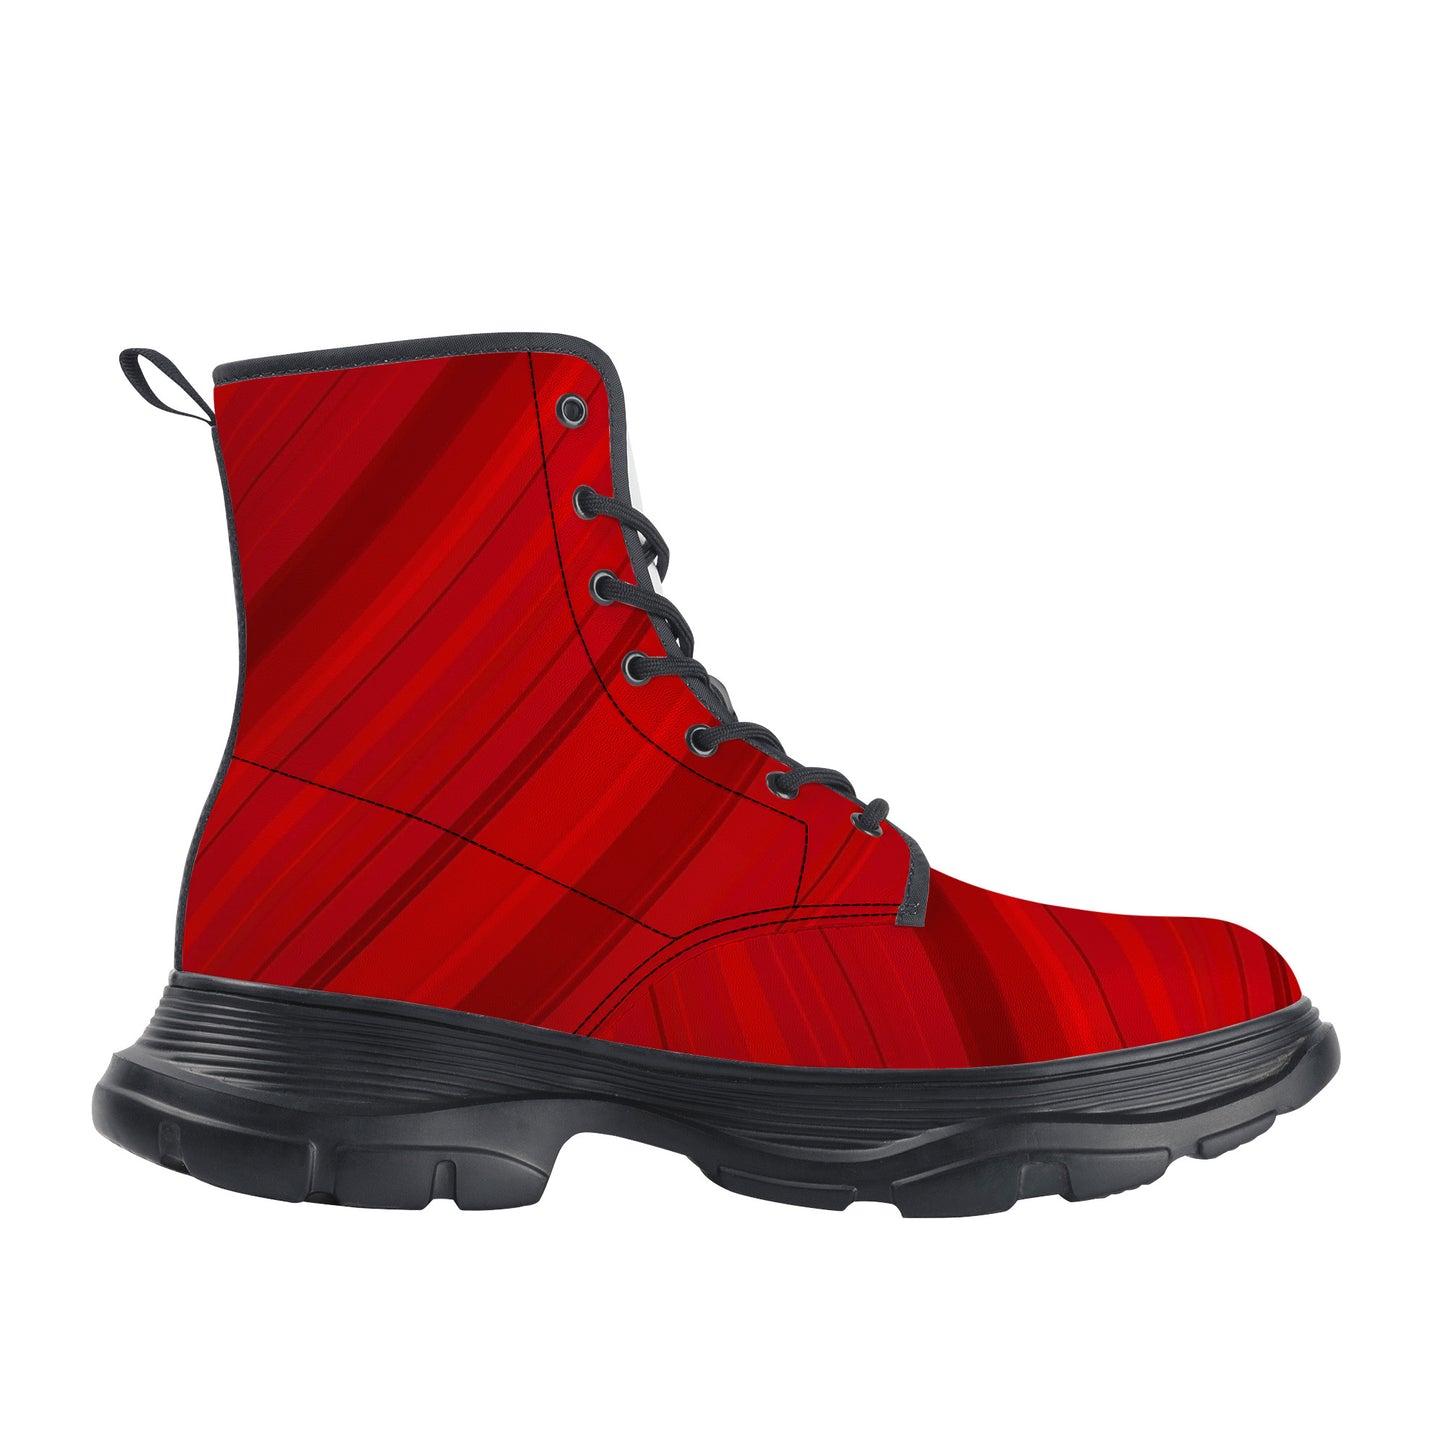 Unisex Chunky Boots - Red